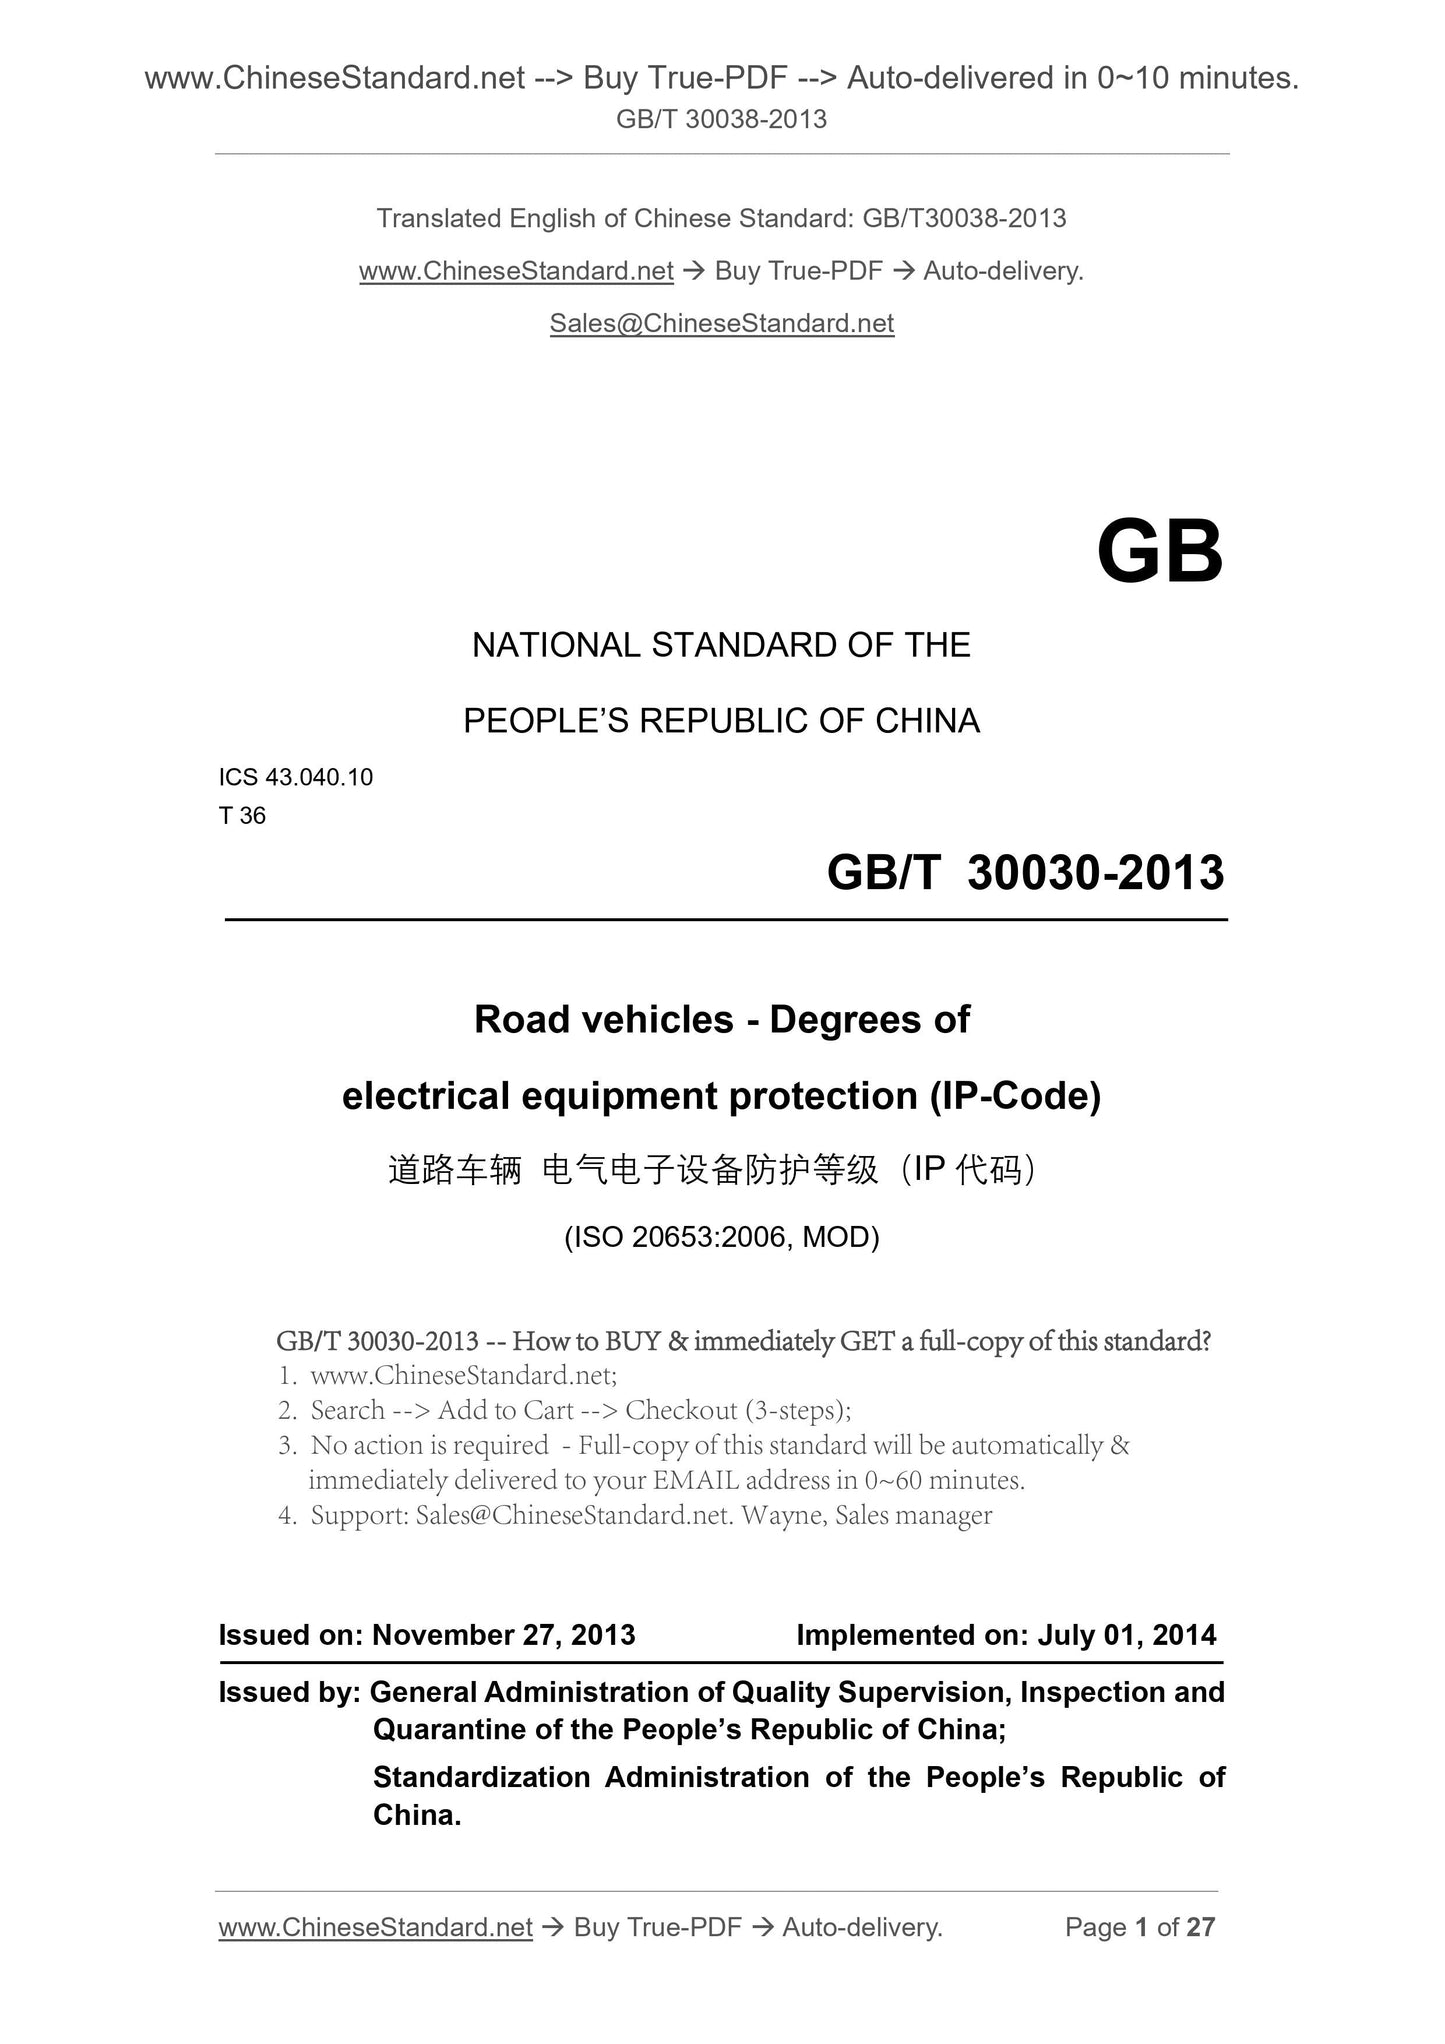 GB/T 30038-2013 Page 1